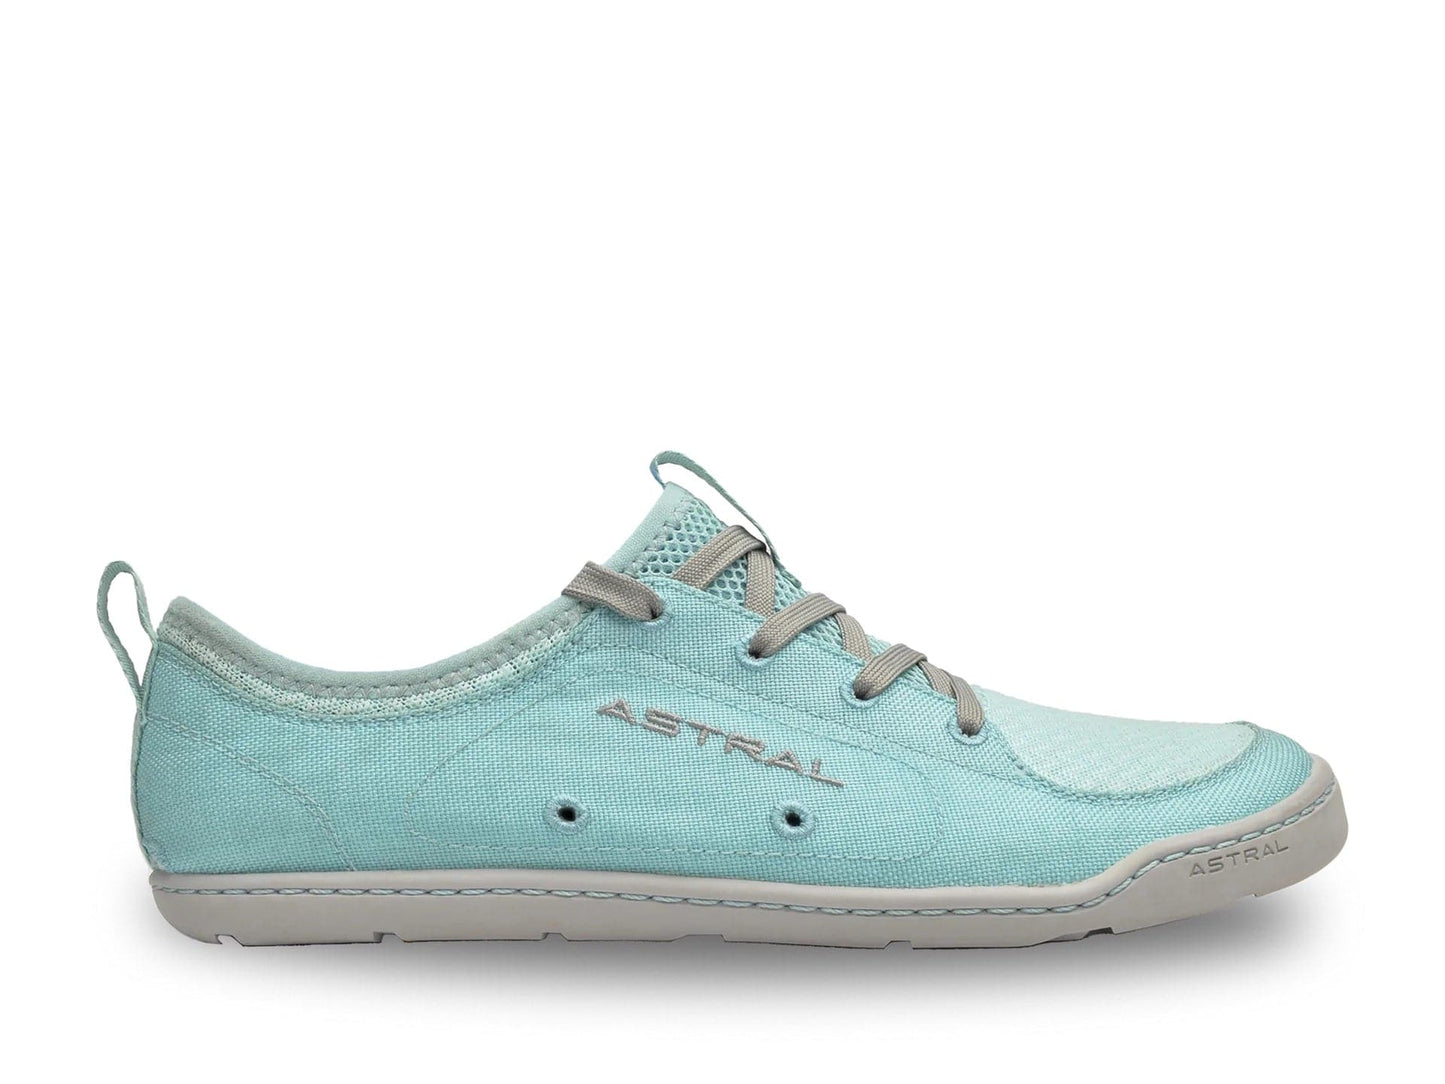 Featuring the Loyak - Women's women's footwear manufactured by Astral shown here from an eleventh angle.